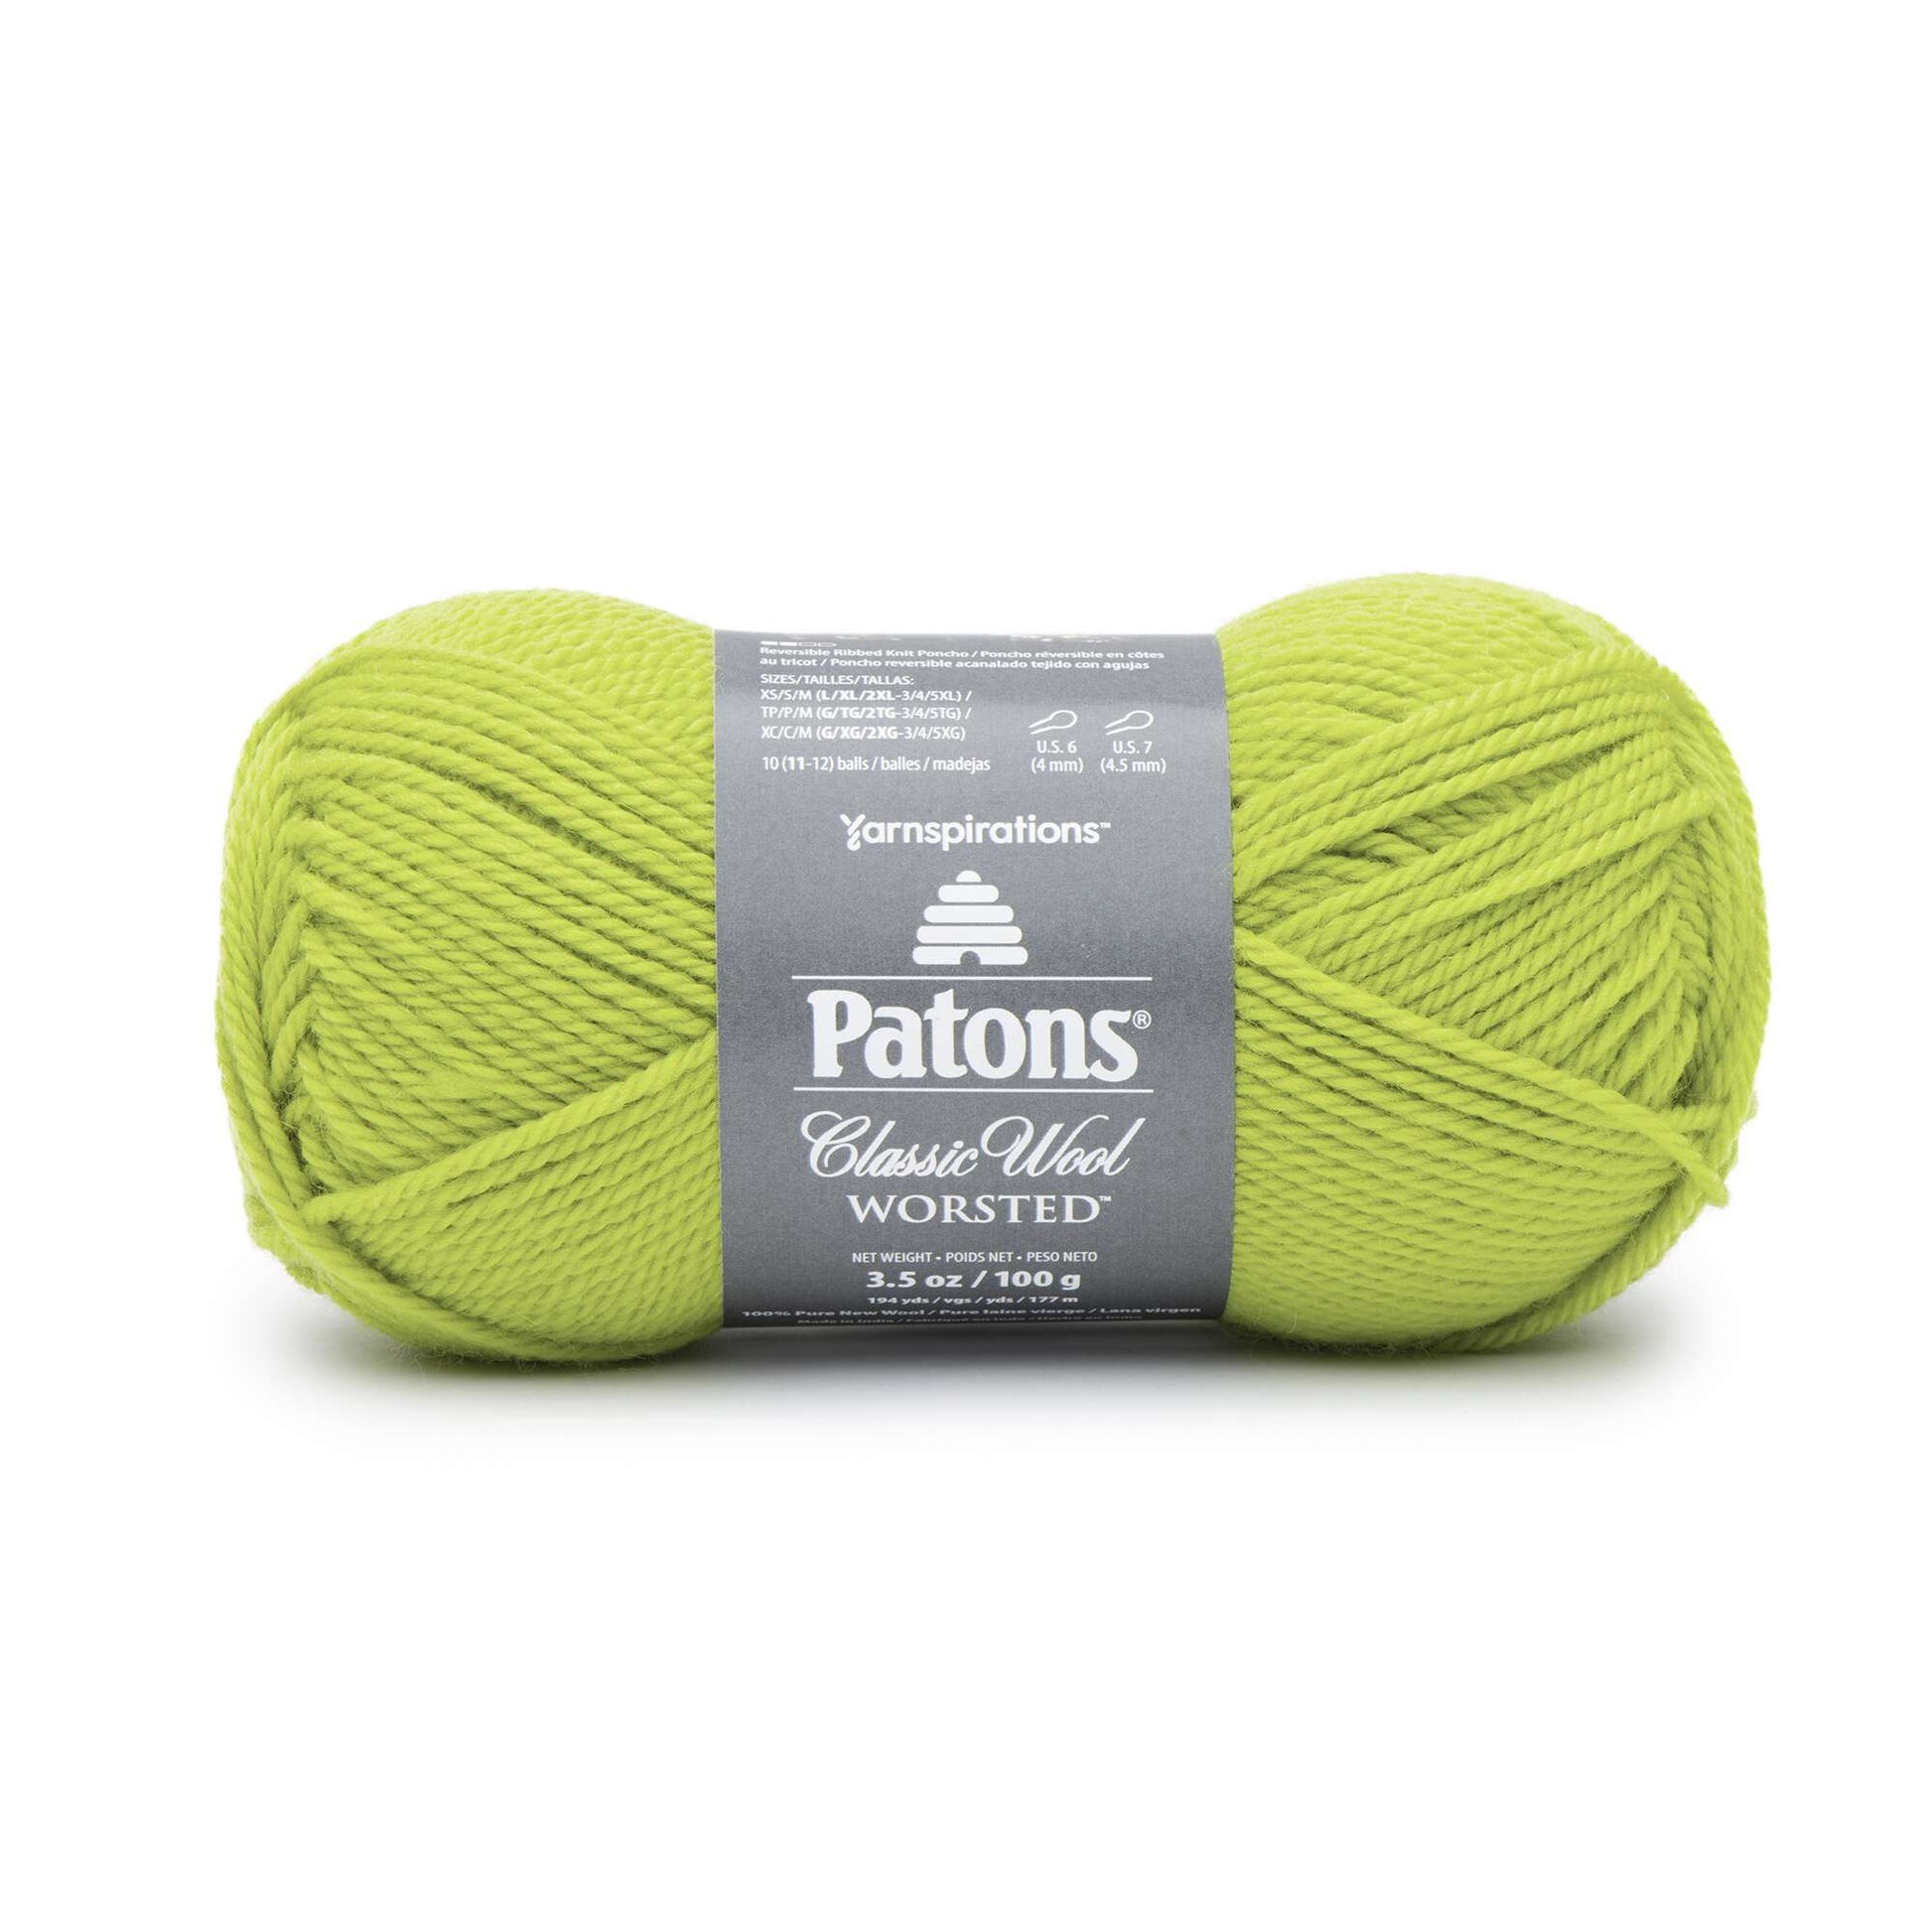 Patons Classic Wool Worsted Yarn Sprout